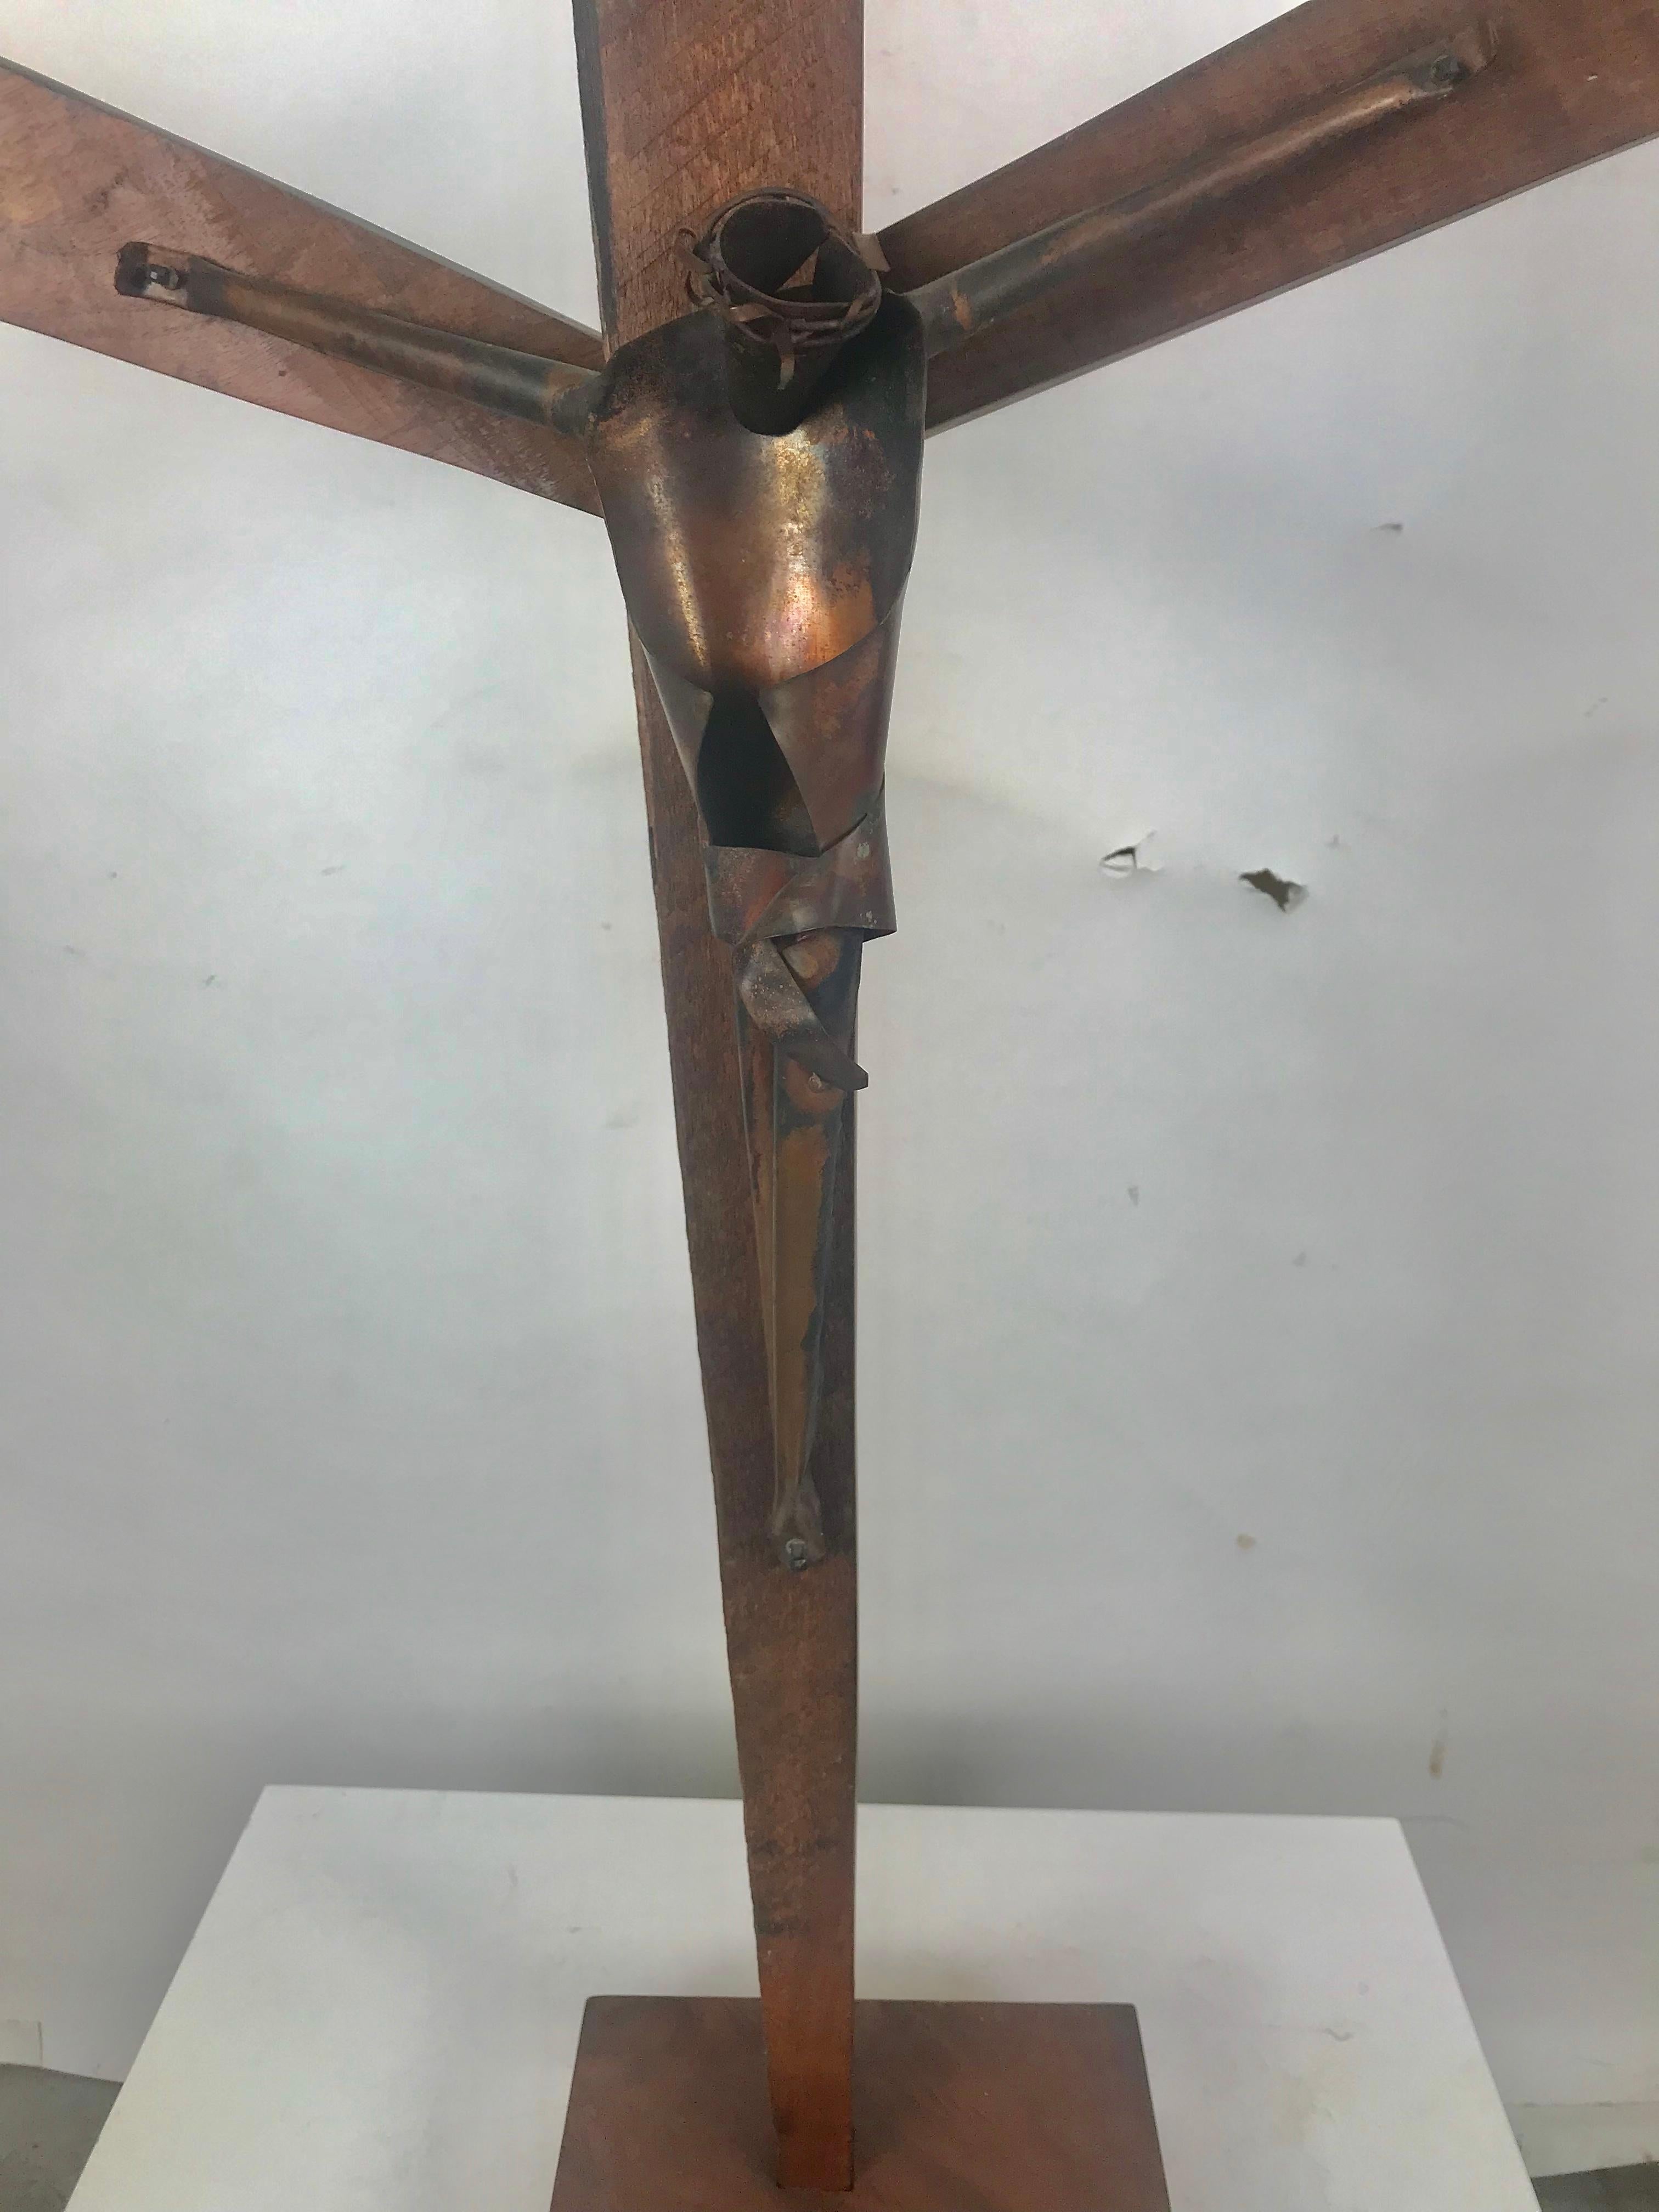 Wonderful modernist sculpture, artist made, signed Crusifix, Russian, bent copper and wood, Reminiscent of sculptural designs by Heifetz, amazing quality, Retains original plaque with artist signature, illegible, appears to be Russian, Jesus figure